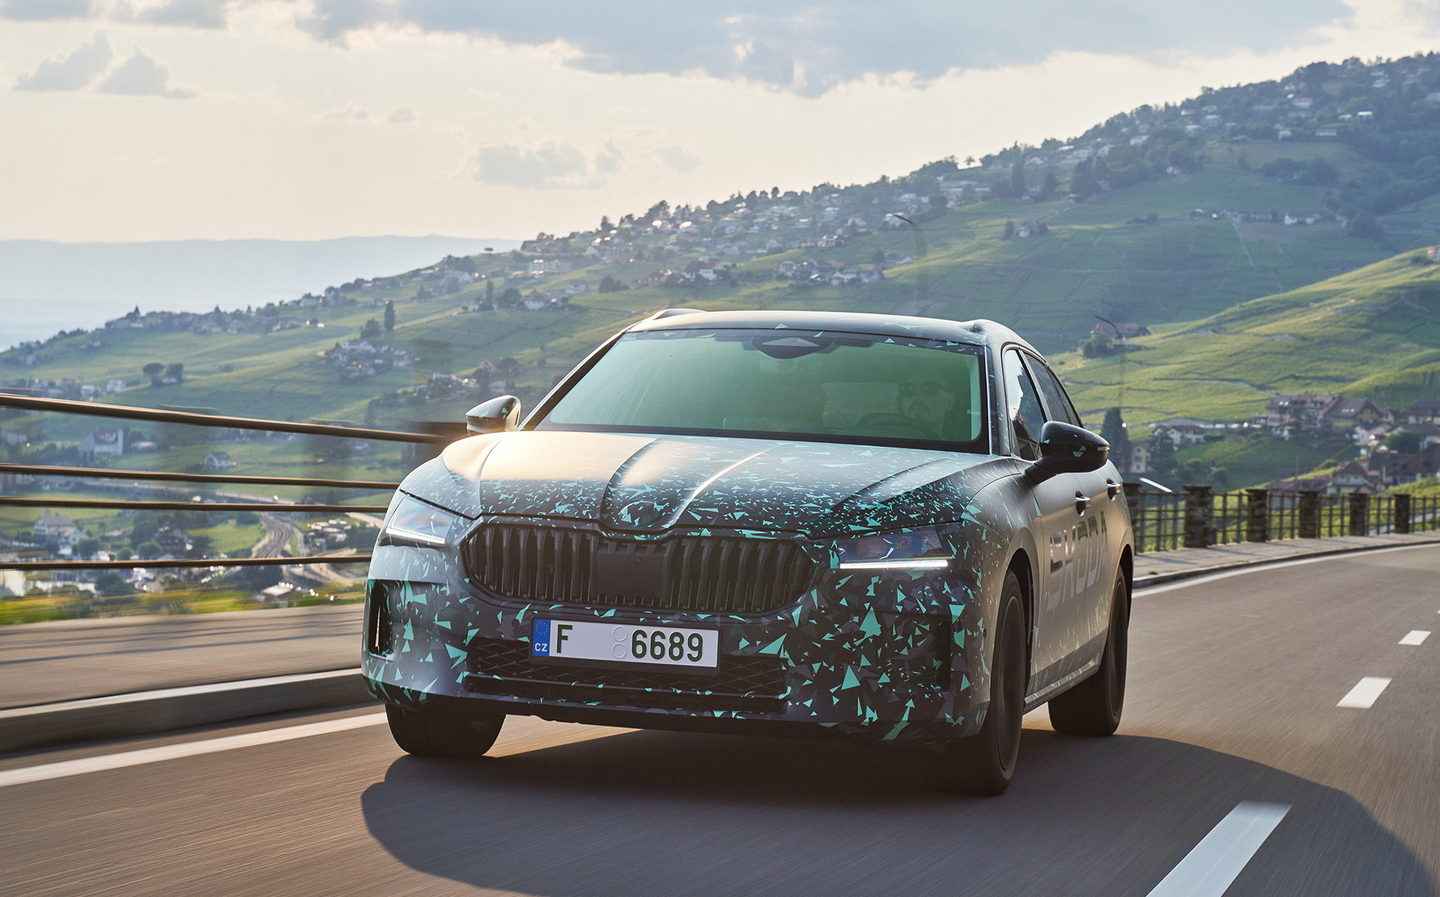 Skoda Superb 2024 prototype review: Interior space and practicality make it  an ideal alternative to the default SUV